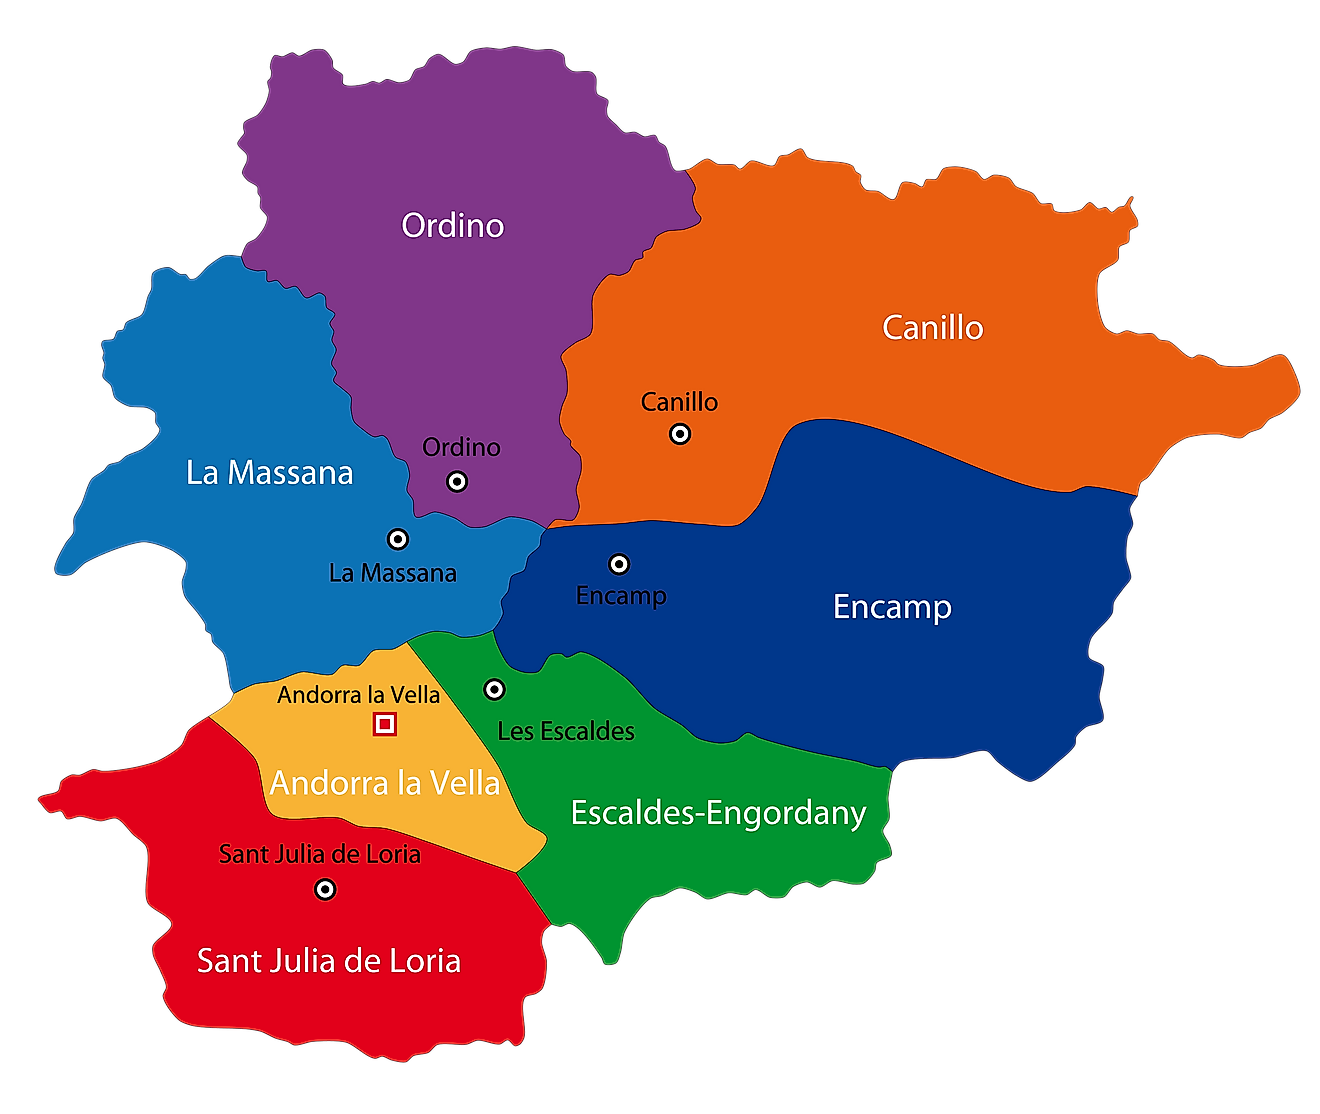 Political Map of Andorra showing its 7 parishes and the capital city of Andorra la Vella